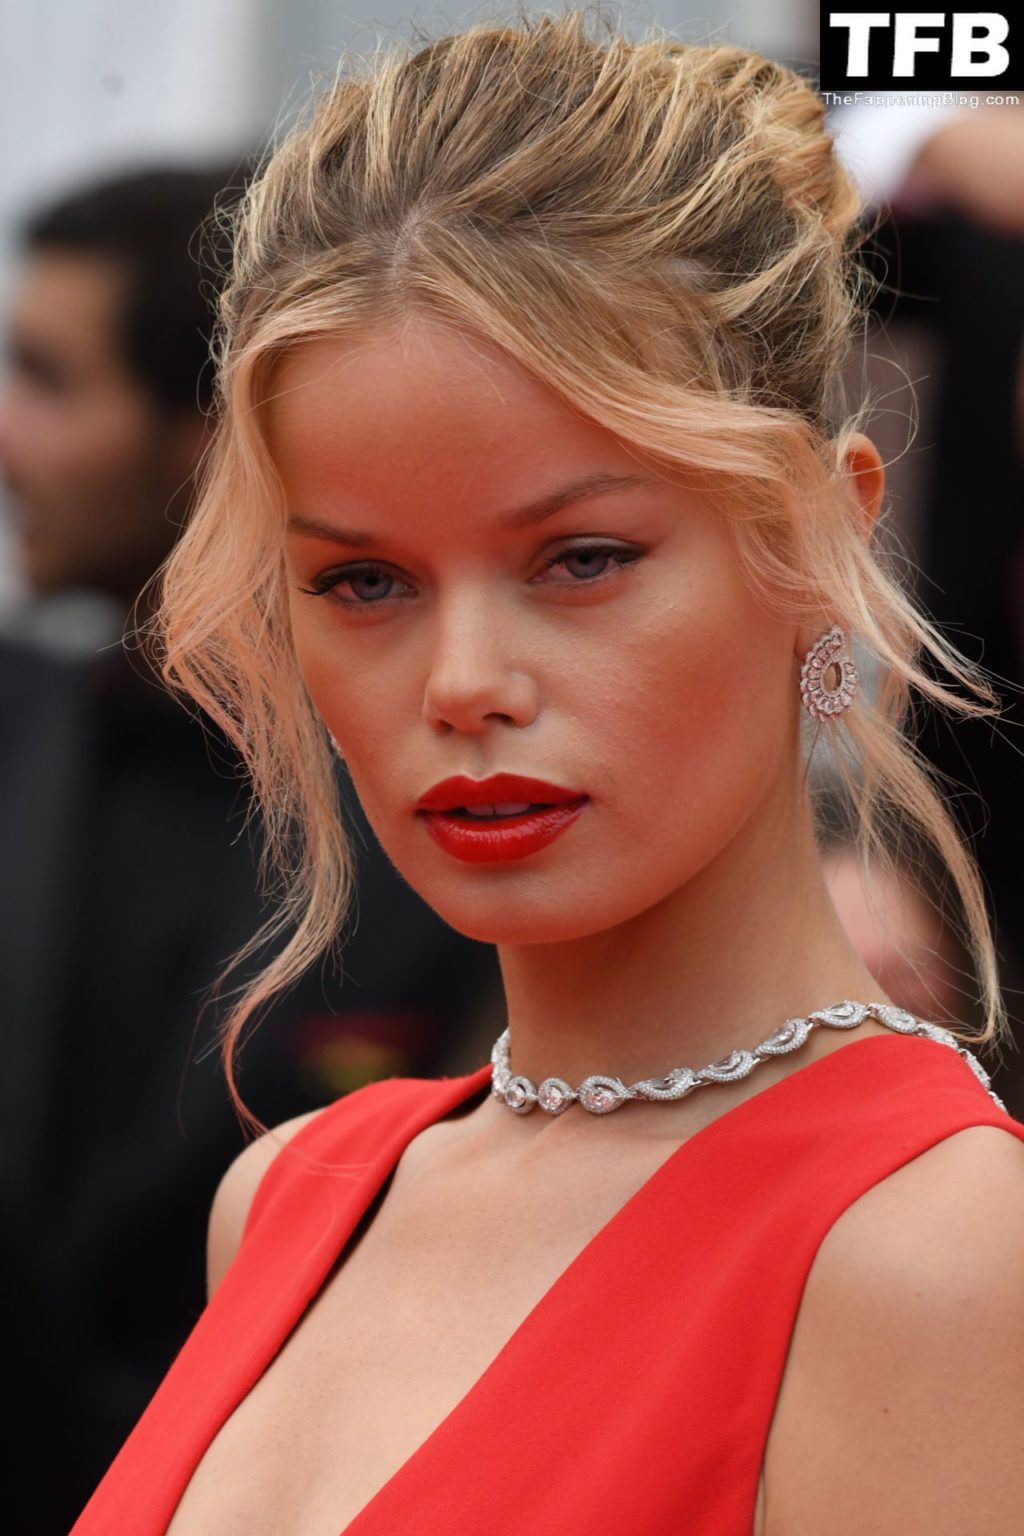 Frida Aasen Sexy The Fappening Blog 139 1024x1536 - Frida Aasen Looks Stunning in a Red Dress at the 75th Annual Cannes Film Festival (153 Photos)